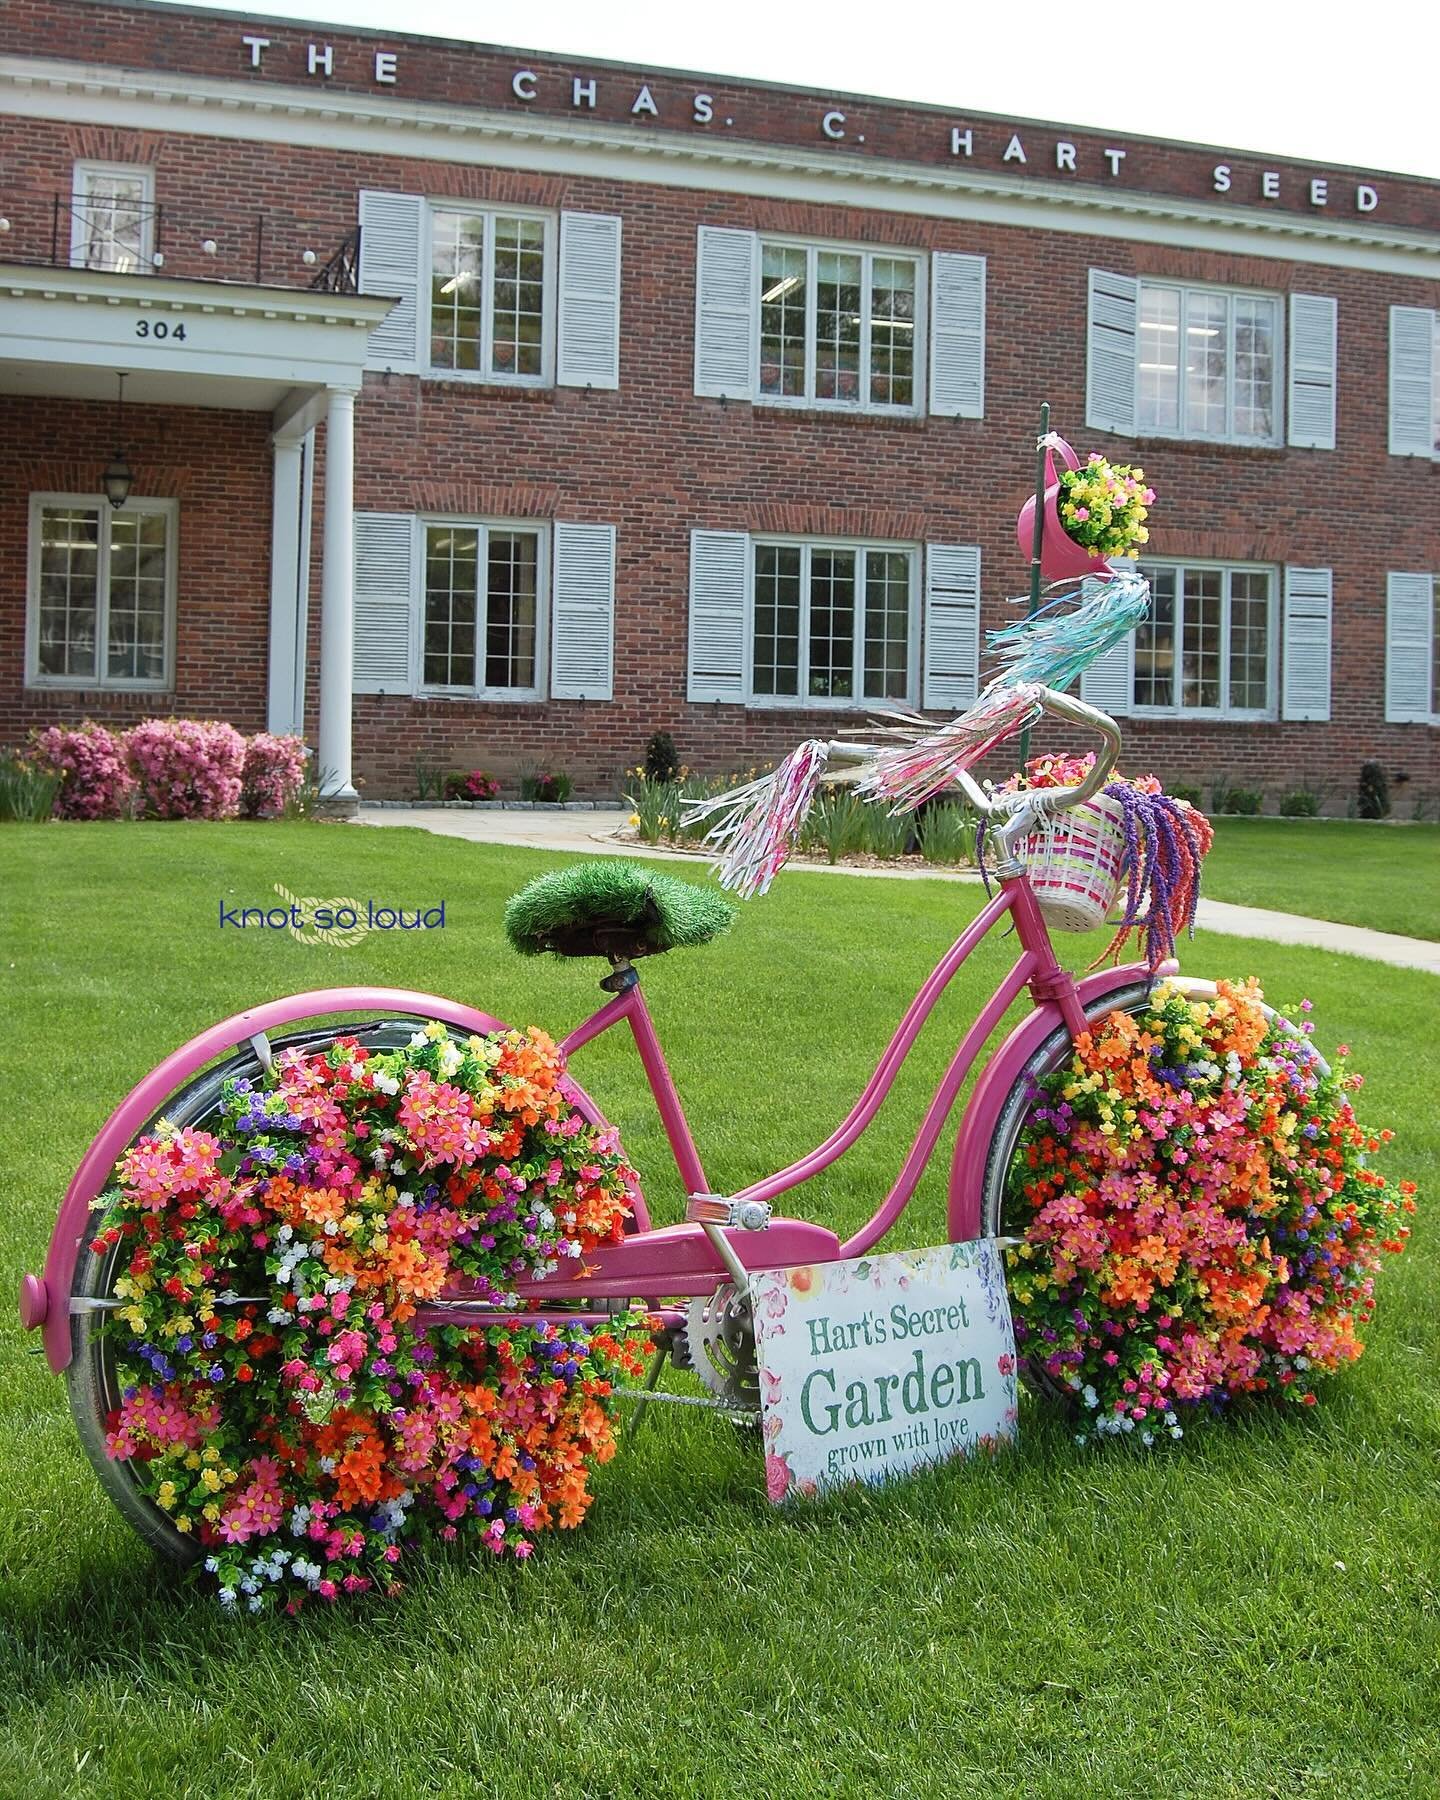 The annual Bicycles on Main event is happening in Old Wethersfield for the entire month of May! 🚲 Pictured is the @hartseedco bicycle, which is my favorite for this year!

If you haven&rsquo;t been to Old Wethersfield, it&rsquo;s a beautiful walkabl